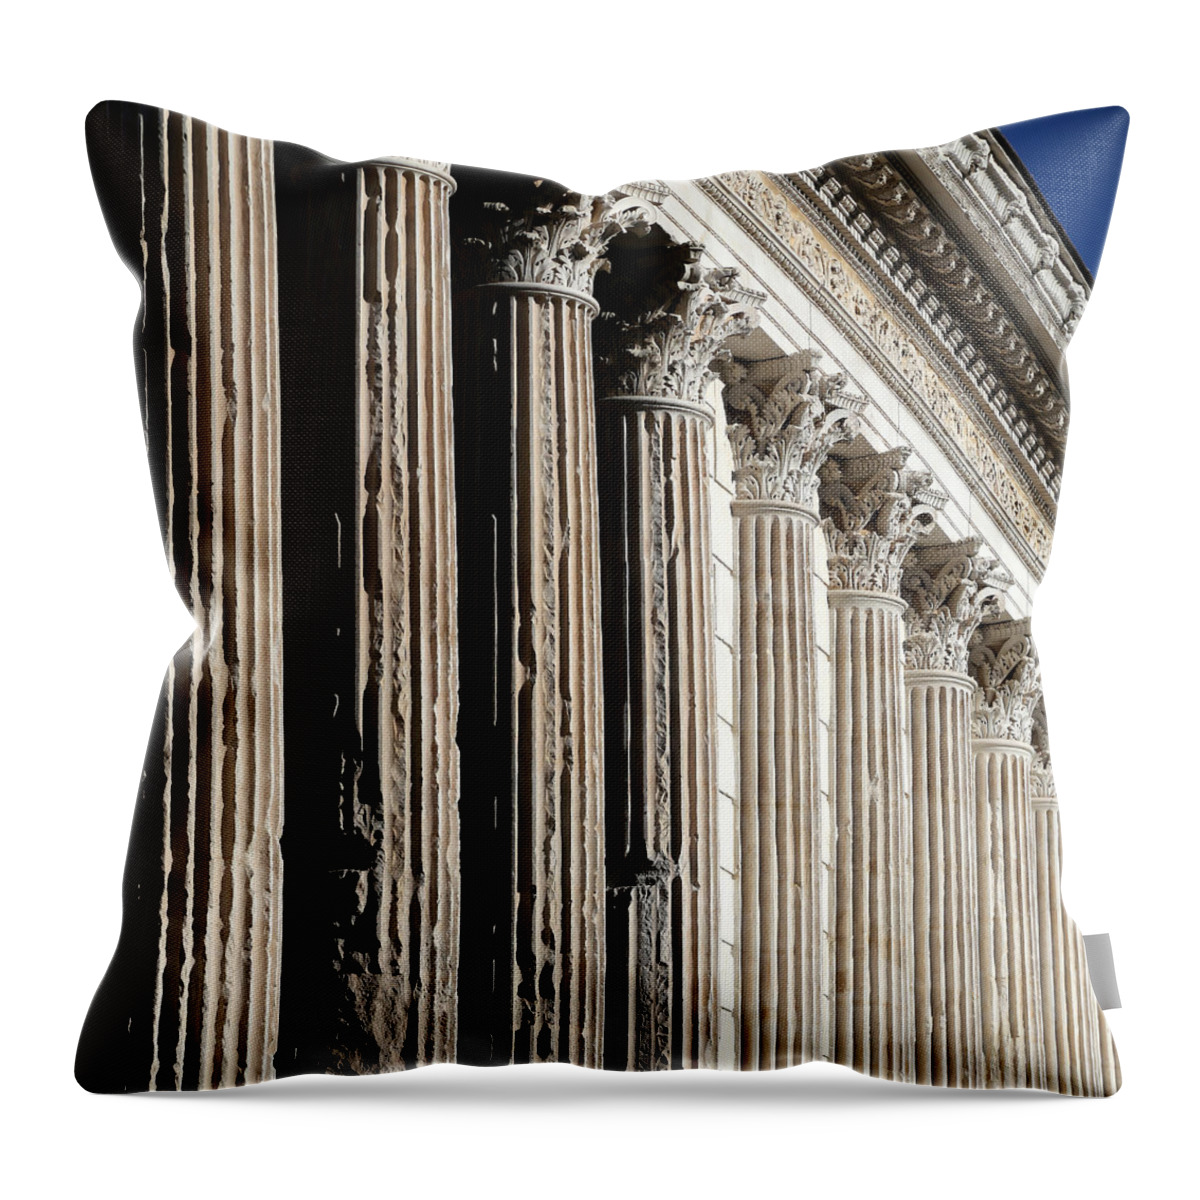 Roman Columns Throw Pillow featuring the photograph Roman Columns 2 by Andrew Fare